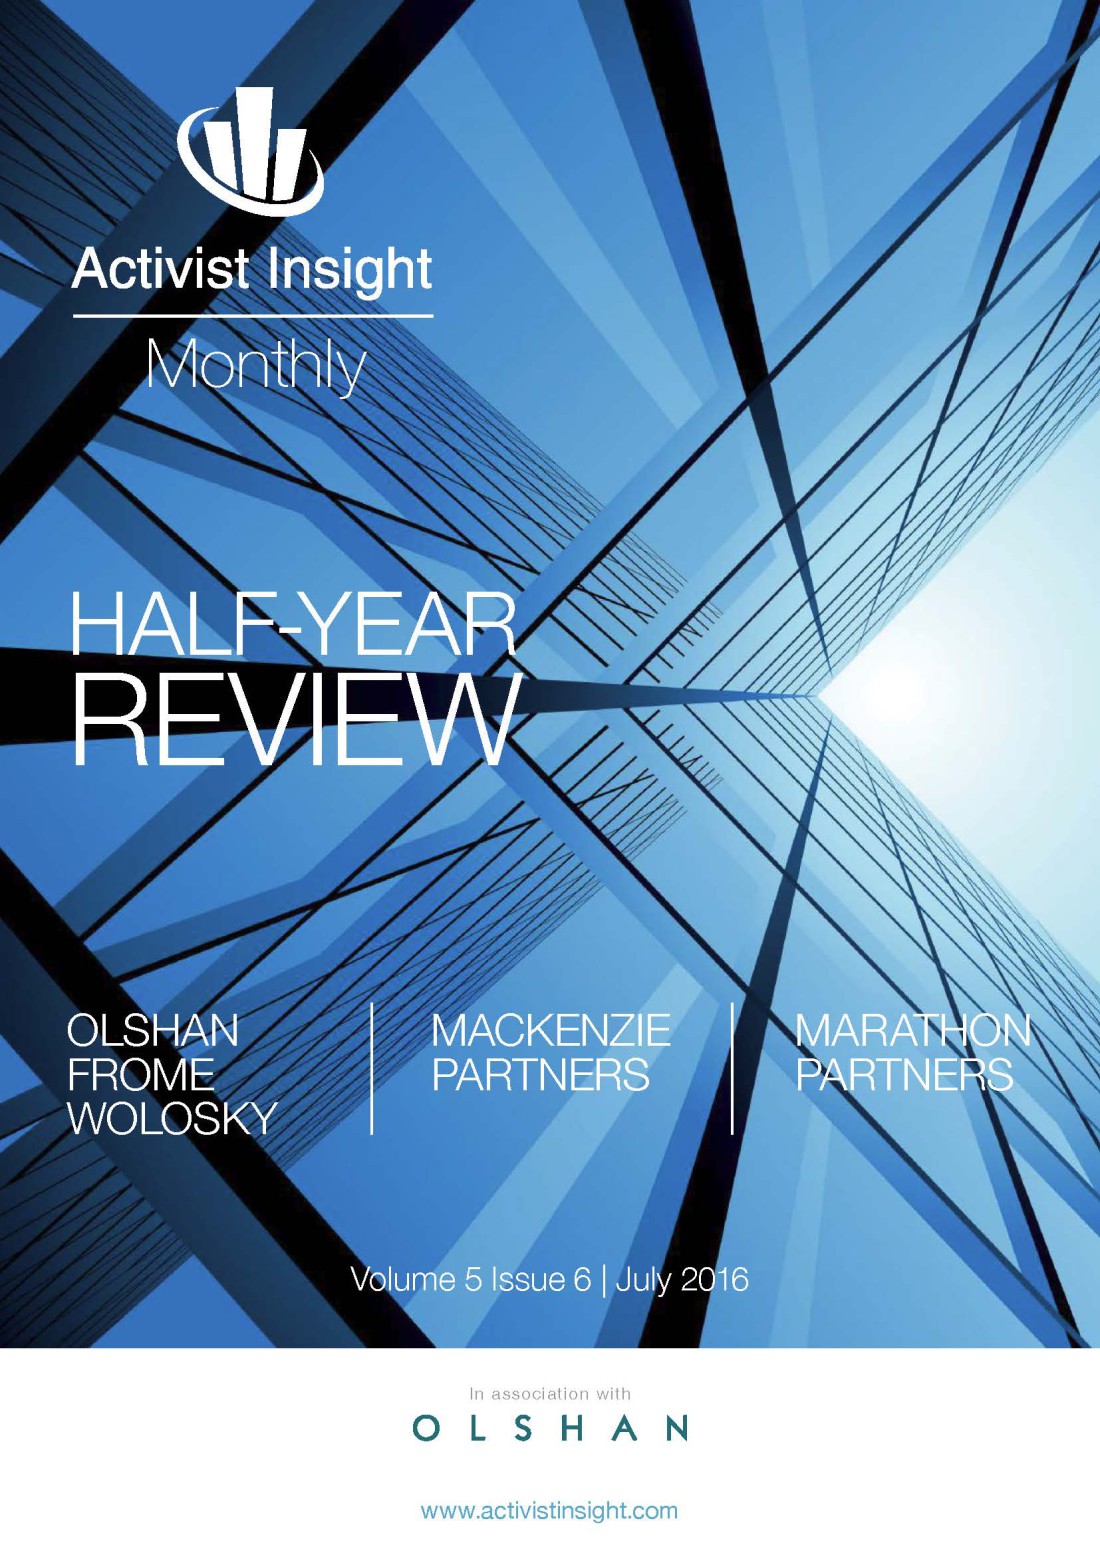 Activist Insight Half-Year Review